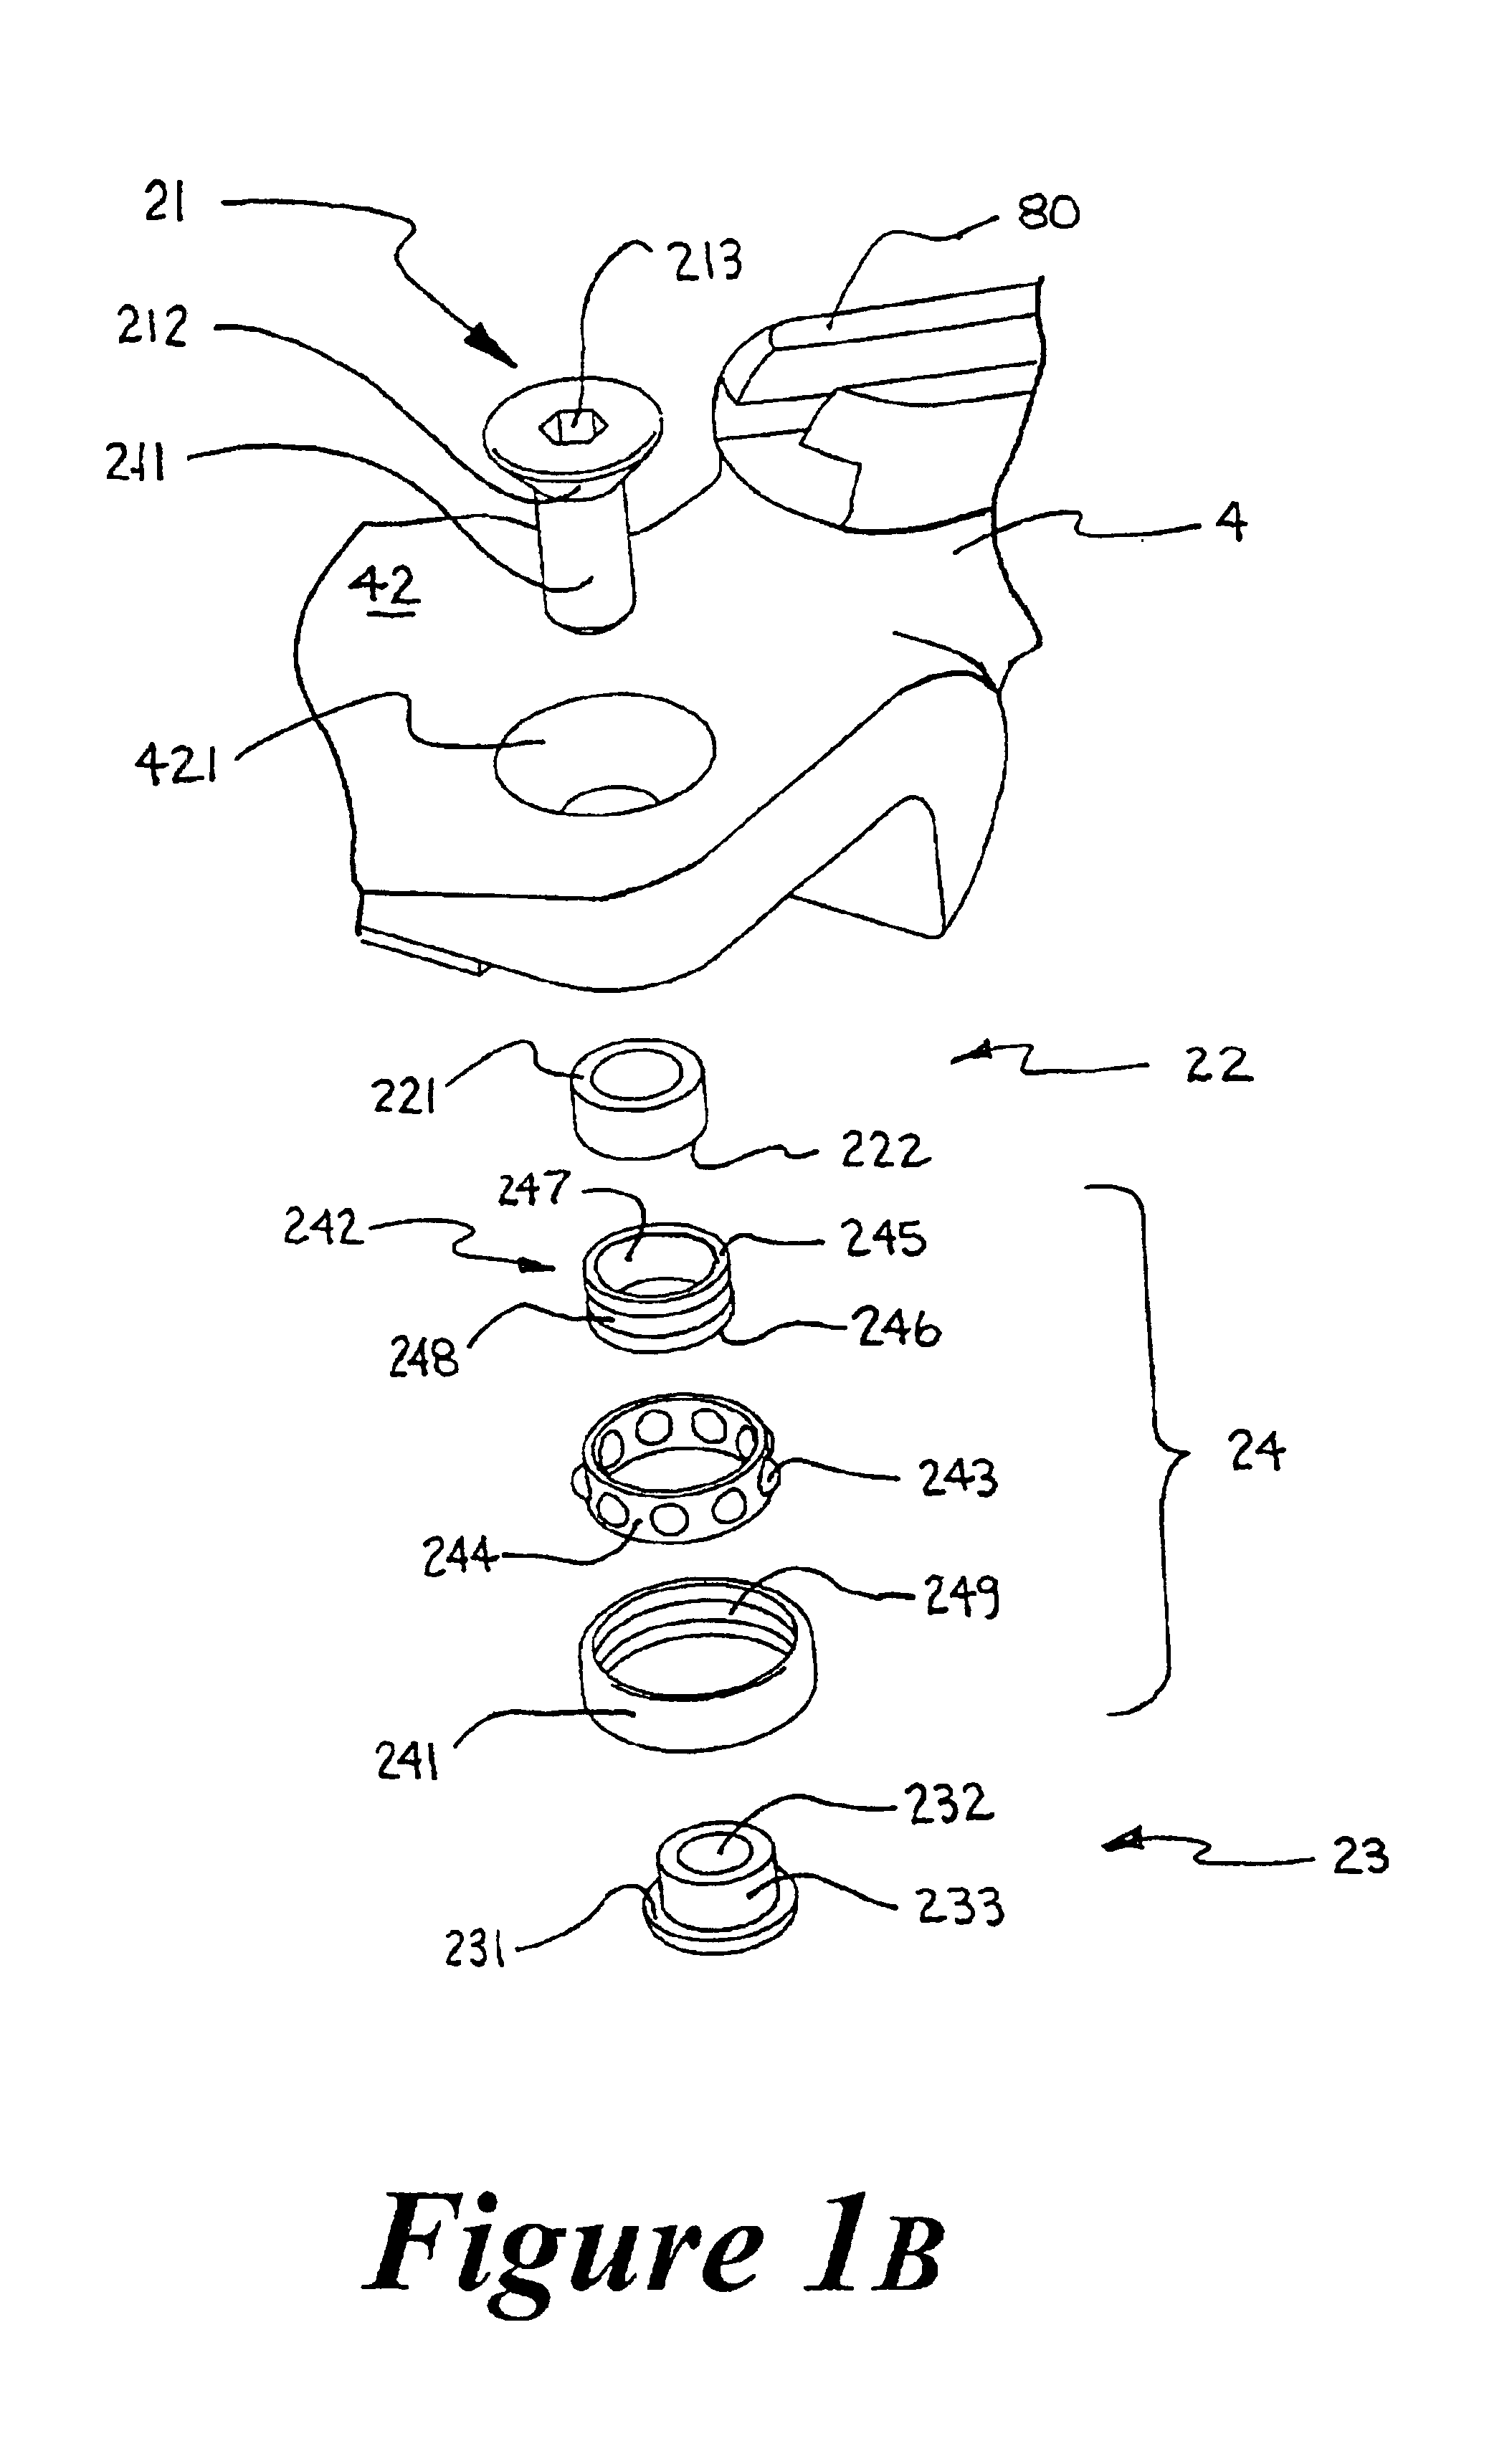 Surgical retractor having low-friction actuating means and contoured blade arms